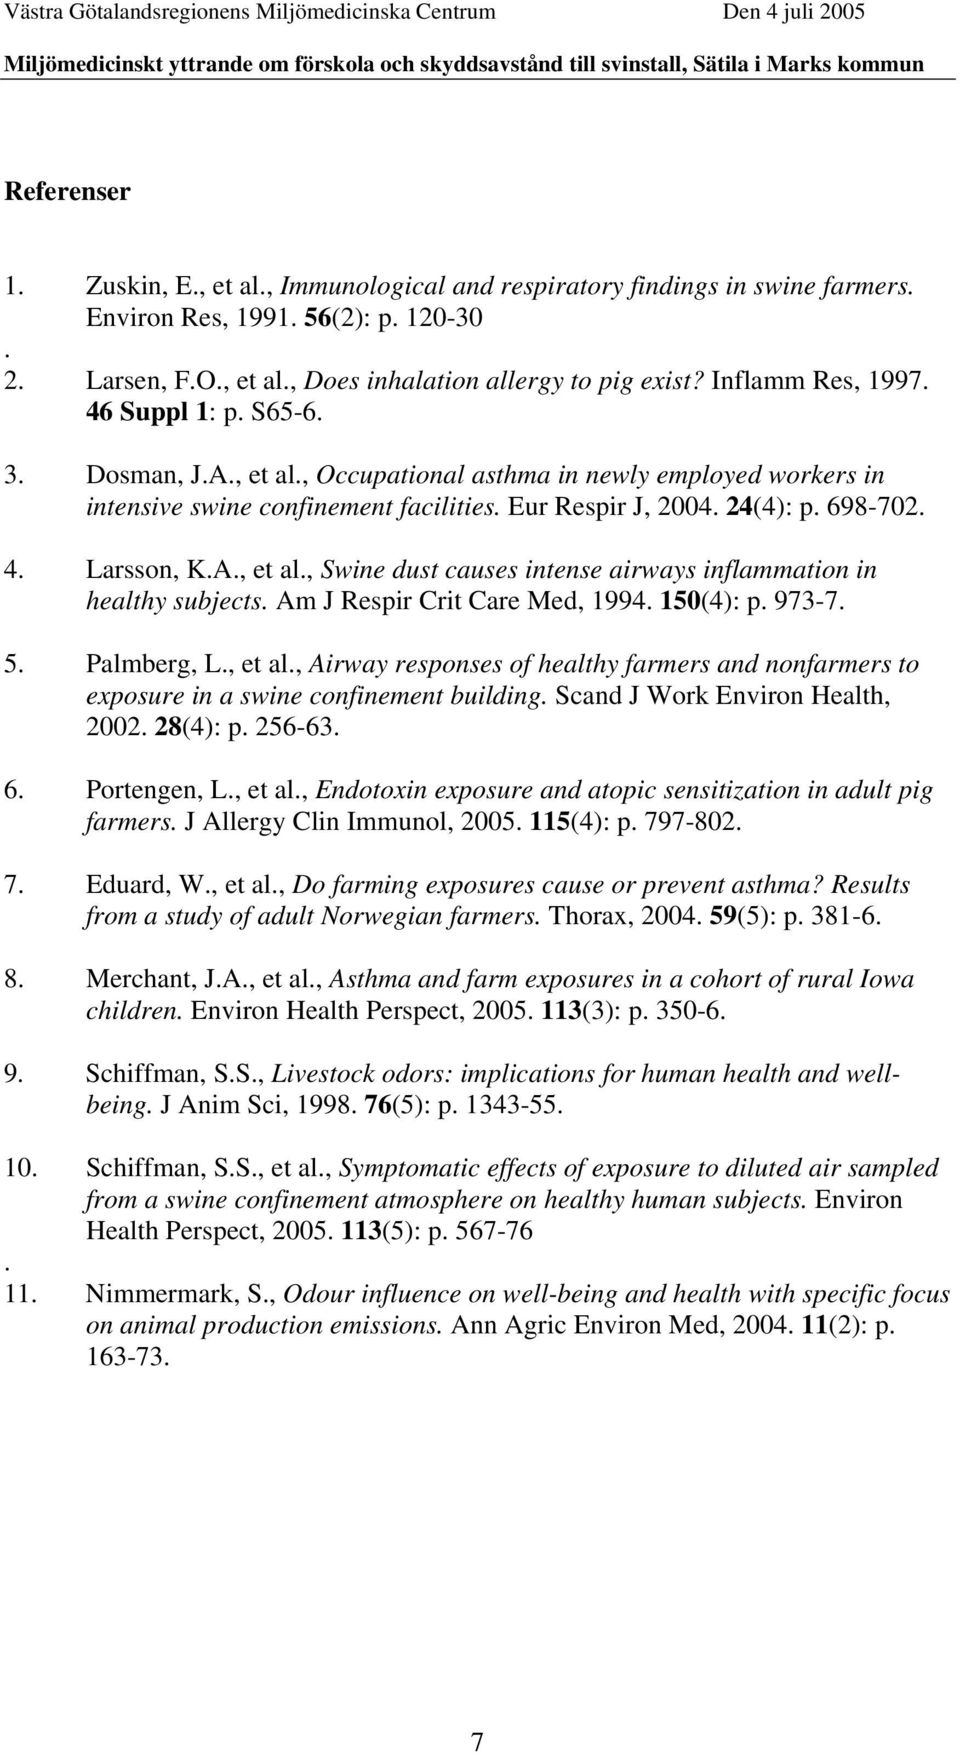 A., et al., Swine dust causes intense airways inflammation in healthy subjects. Am J Respir Crit Care Med, 1994. 150(4): p. 973-7. 5. Palmberg, L., et al., Airway responses of healthy farmers and nonfarmers to exposure in a swine confinement building.